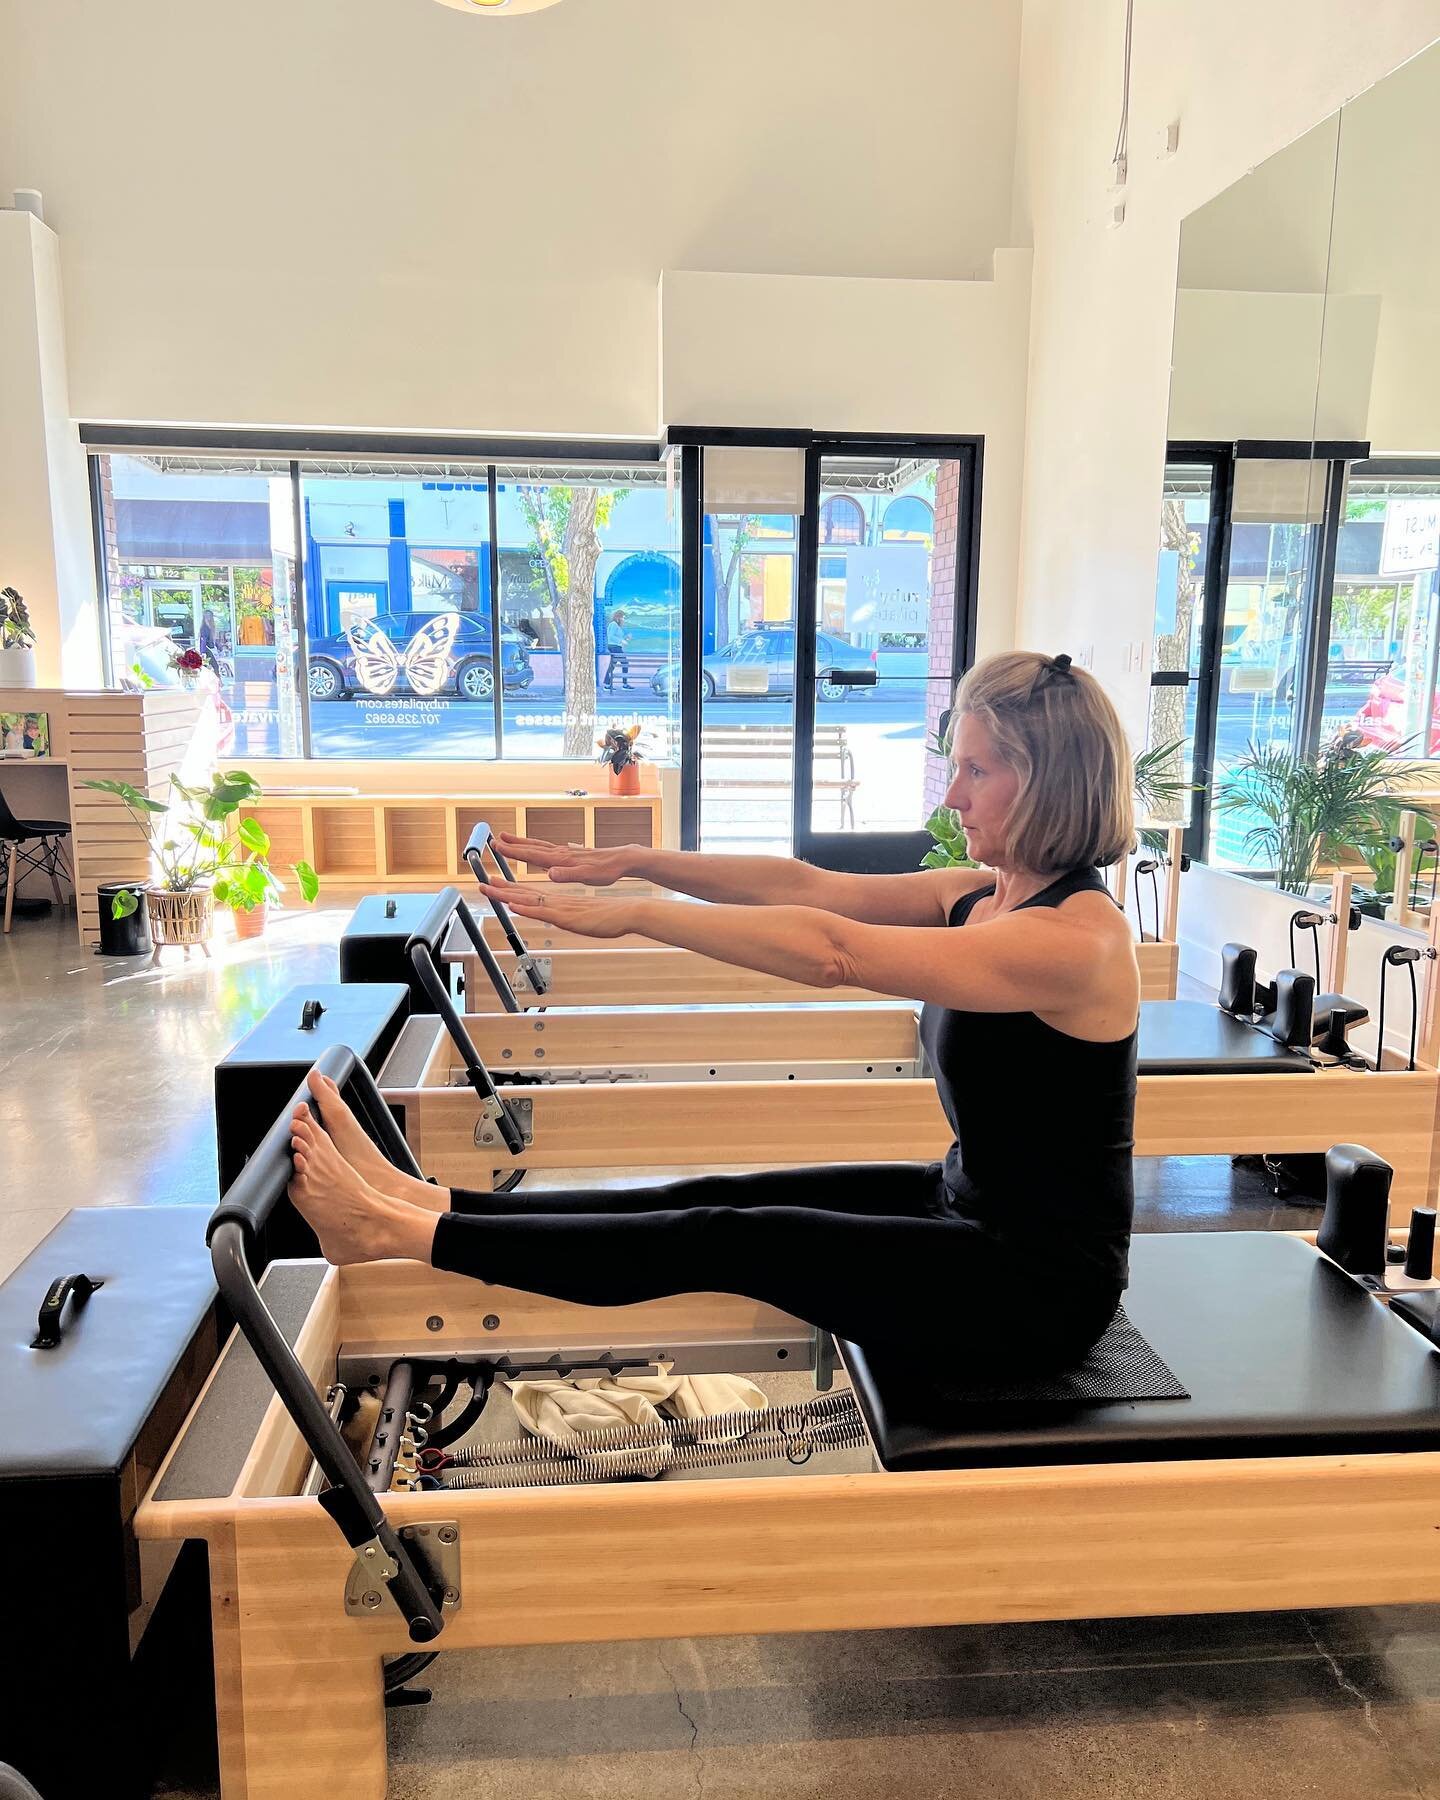 Who loves Pilates Stomach Massage? 

Raise your hand!

Visit www.rubypilates.com to see our full class schedule. 

We also offer private instruction.

We can&rsquo;t wait to meet you!

#rubypilates #createspaceyoulove #pilates #pilatesstudio #sebasto